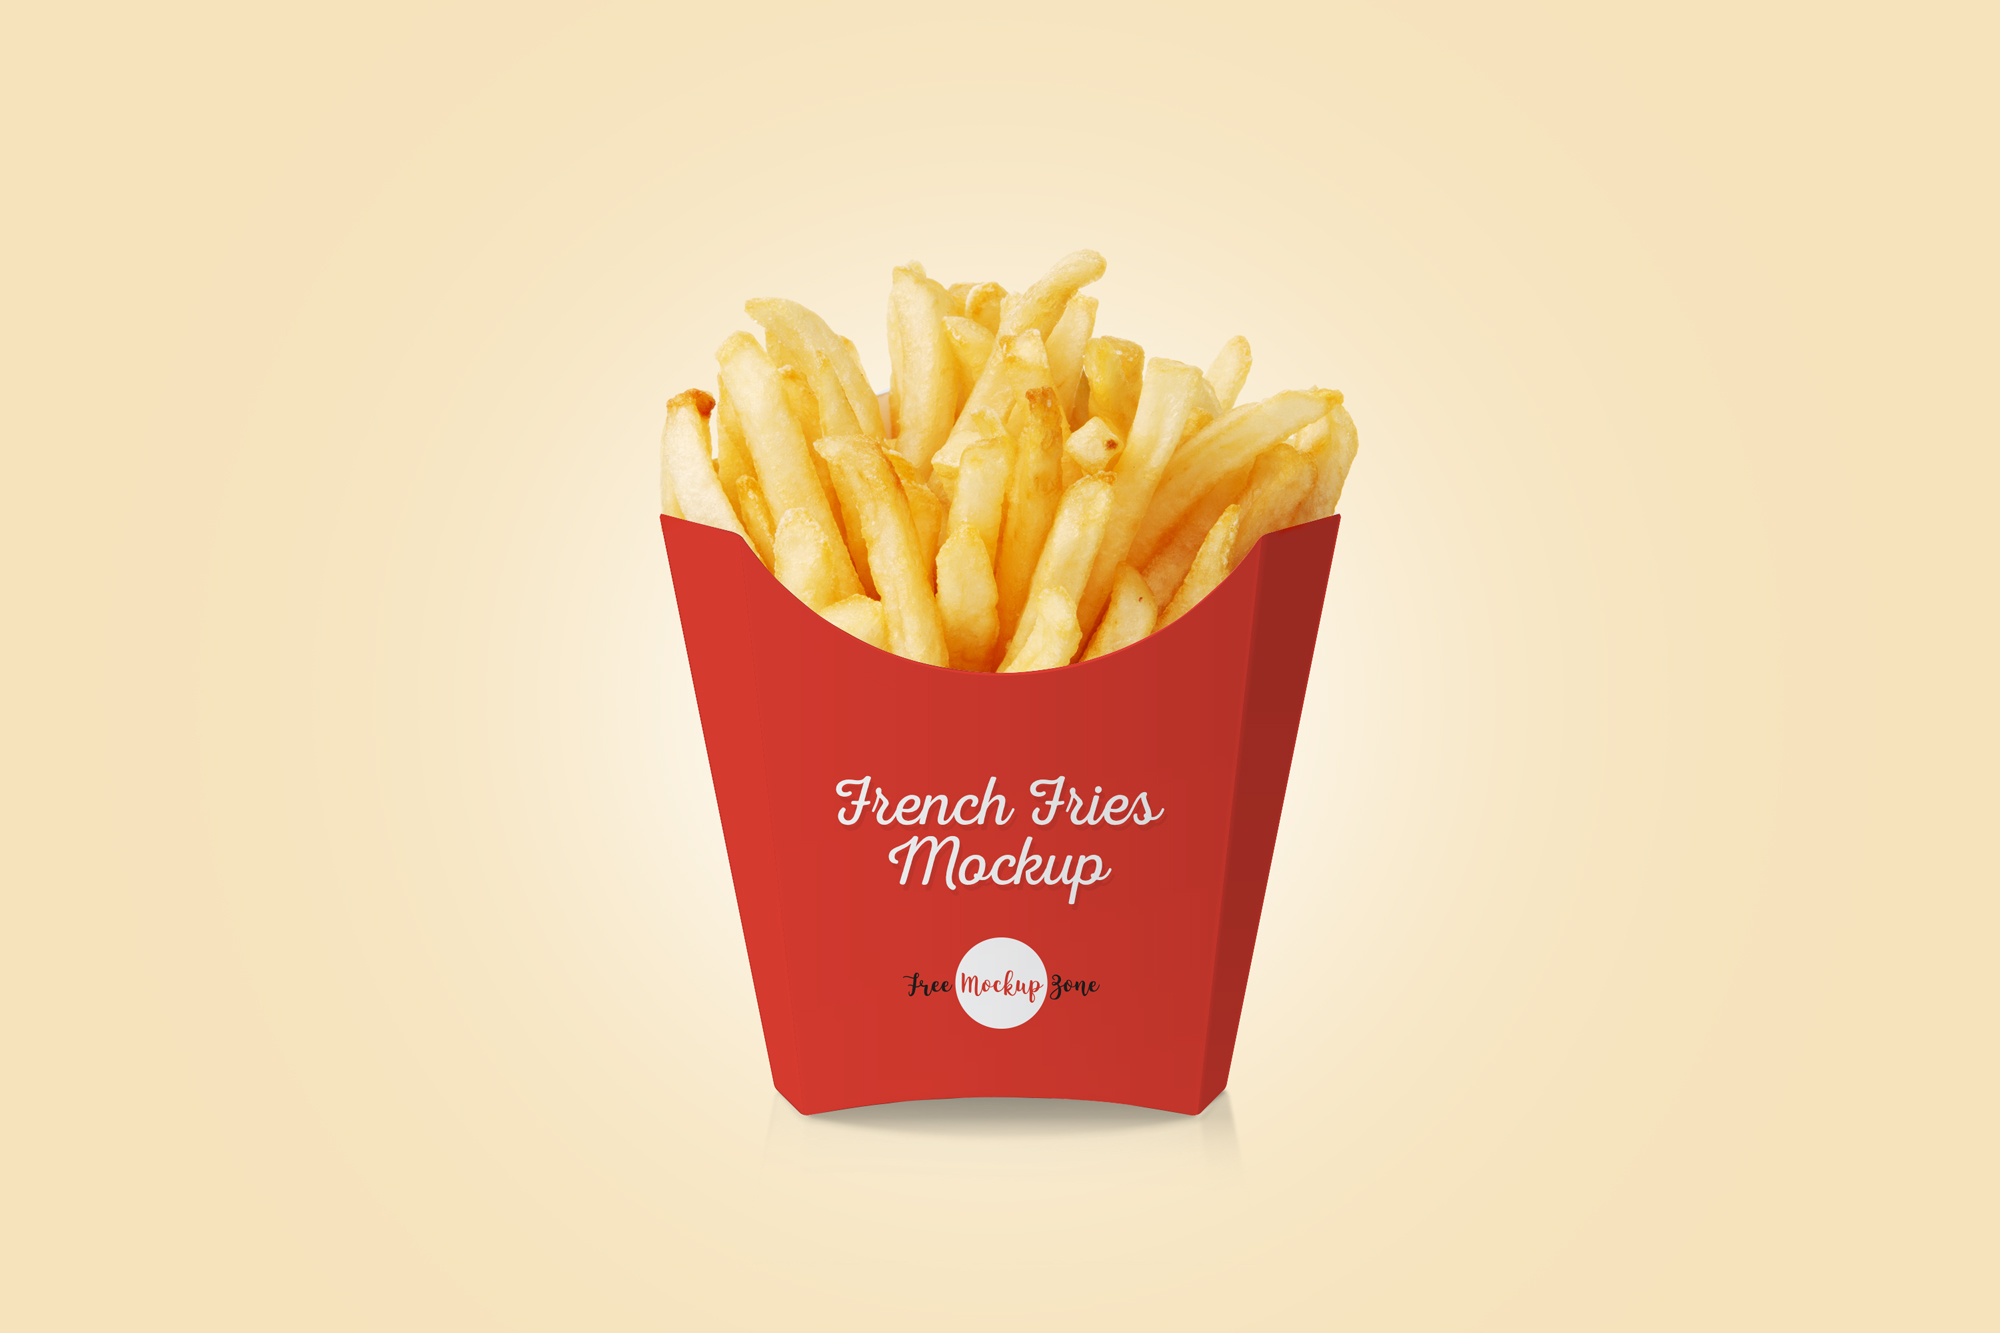 4 Steps to Finding the Best French fry boxes in the Market